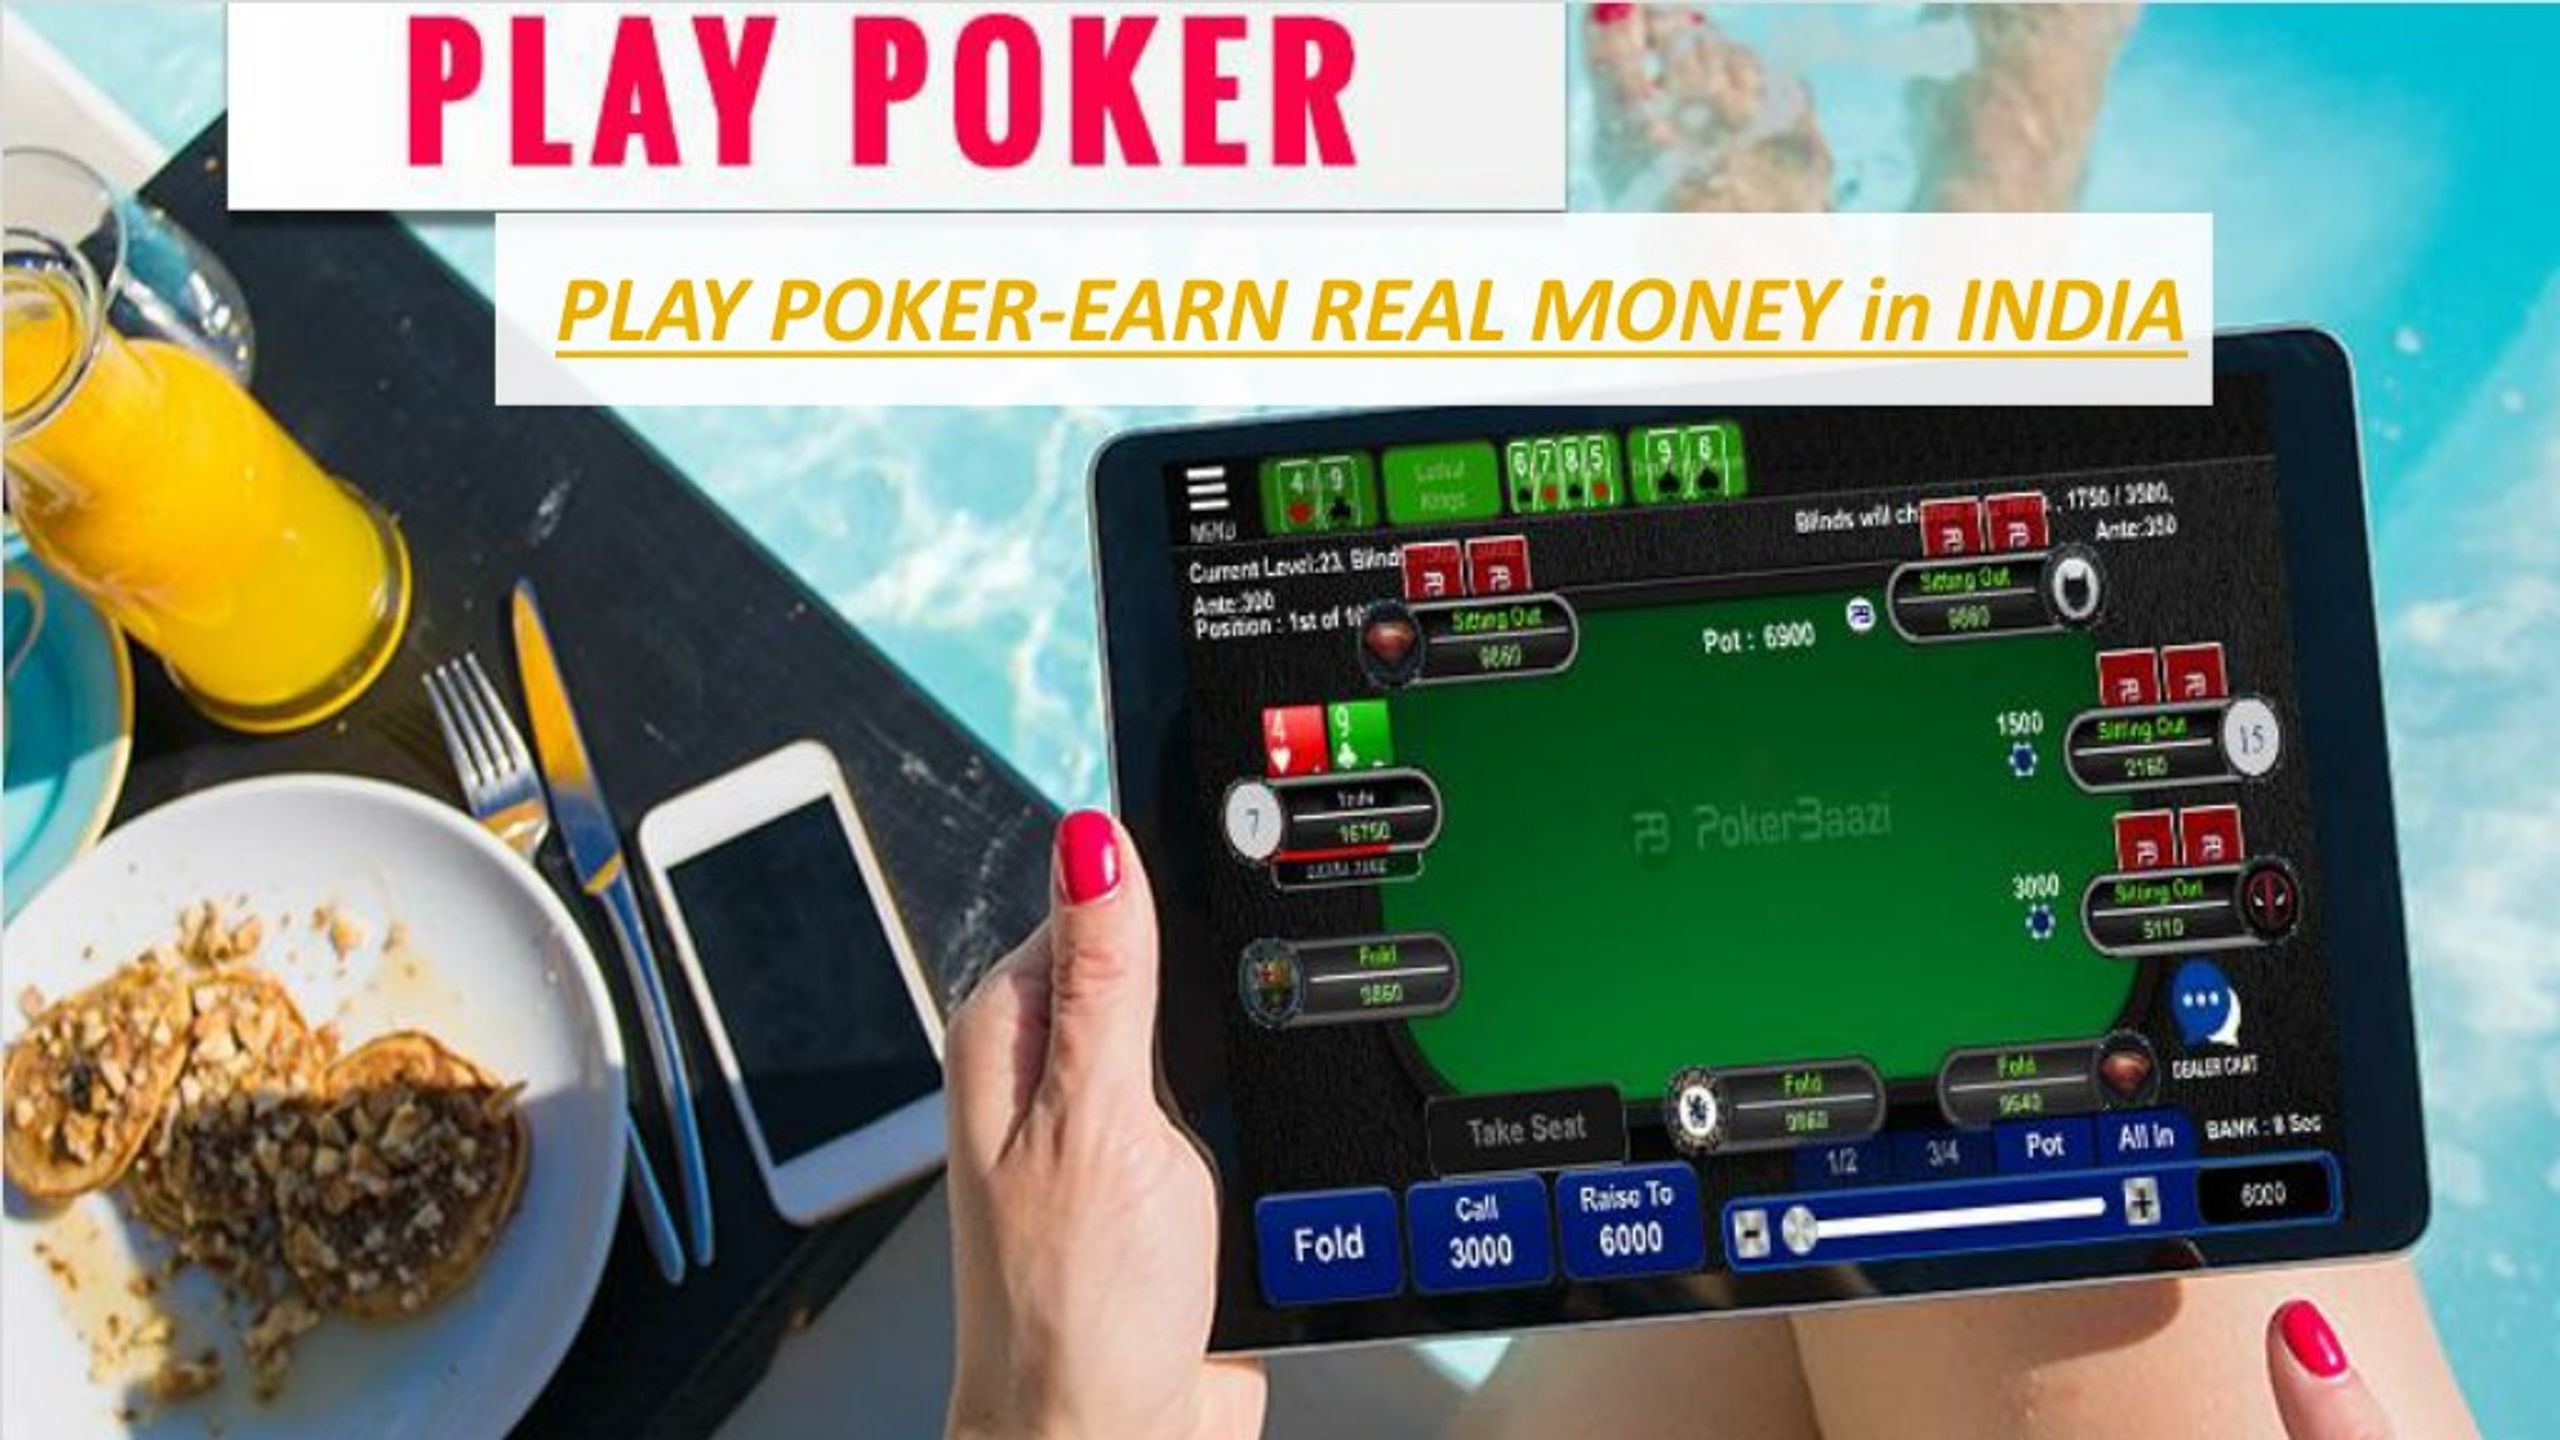 Most Trusted Real Money Poker Sites